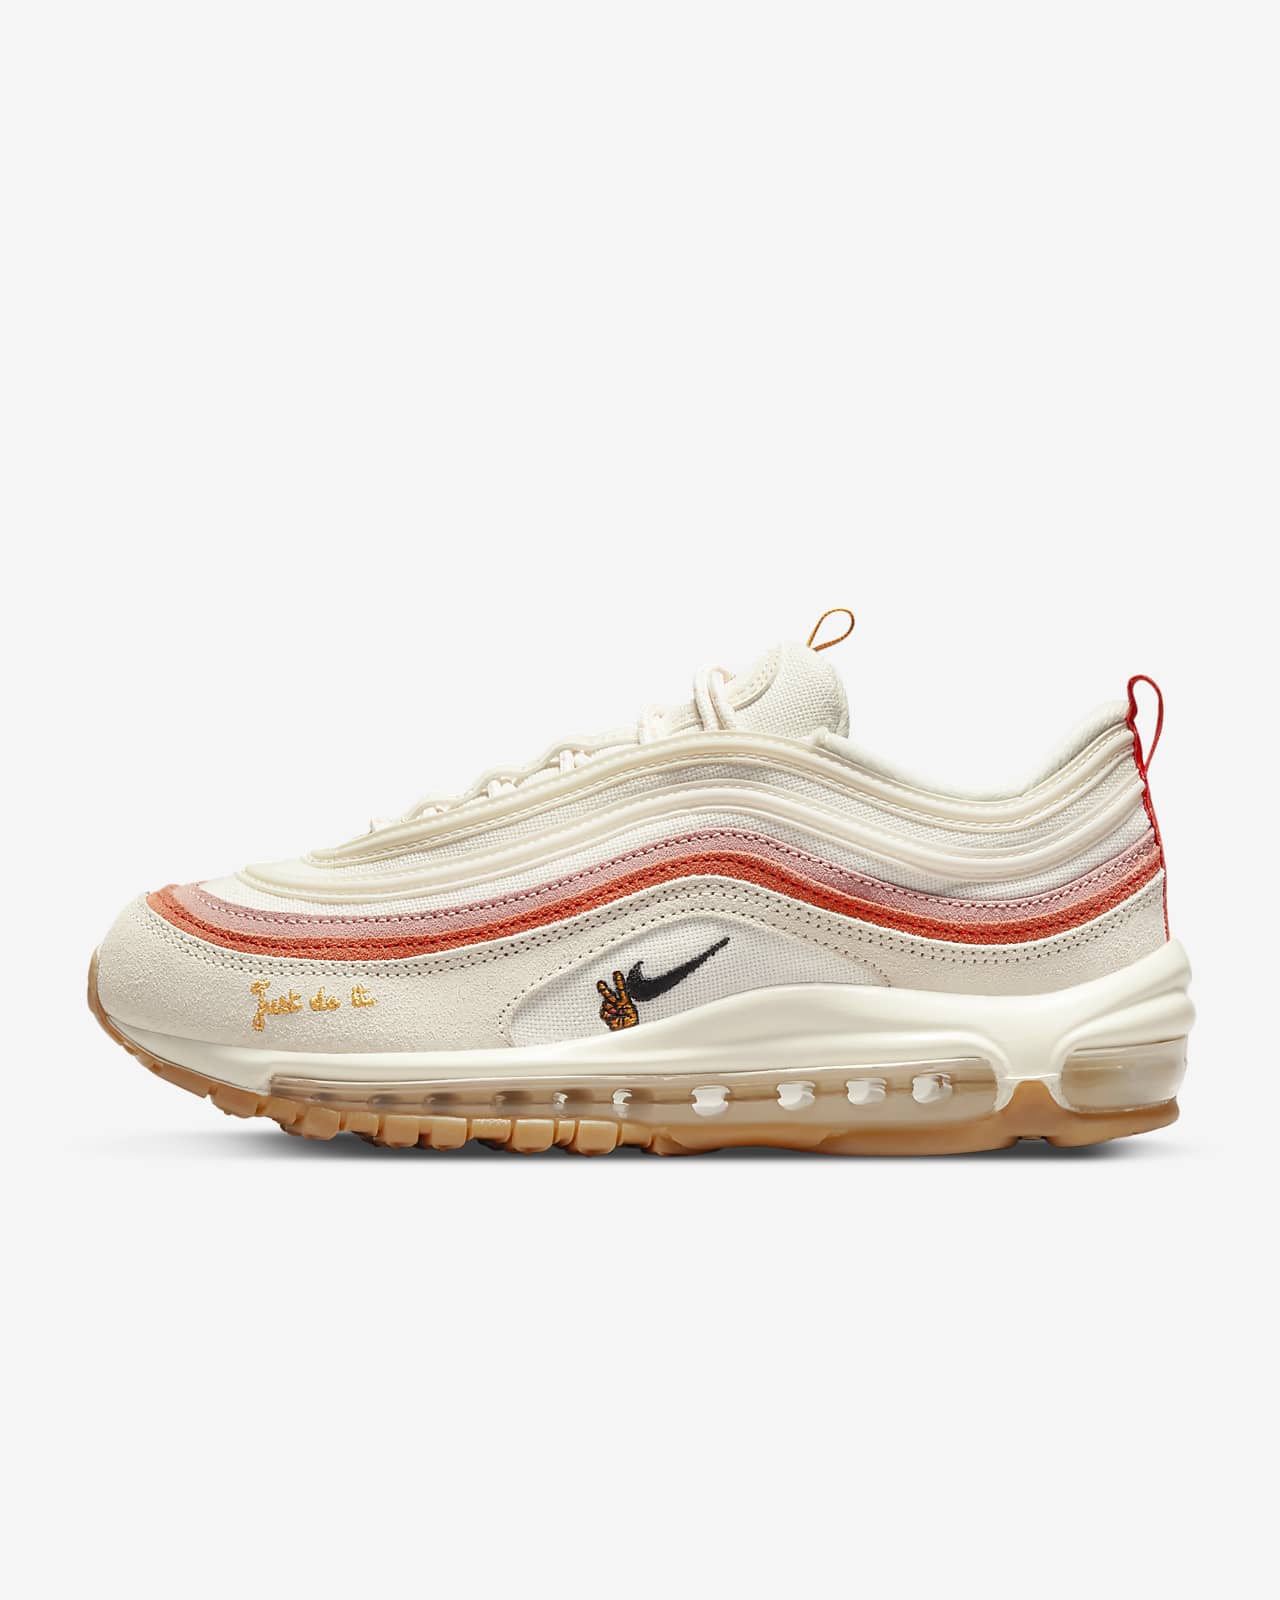 Nike Air Max 97 Women's Shoes سماعة قران